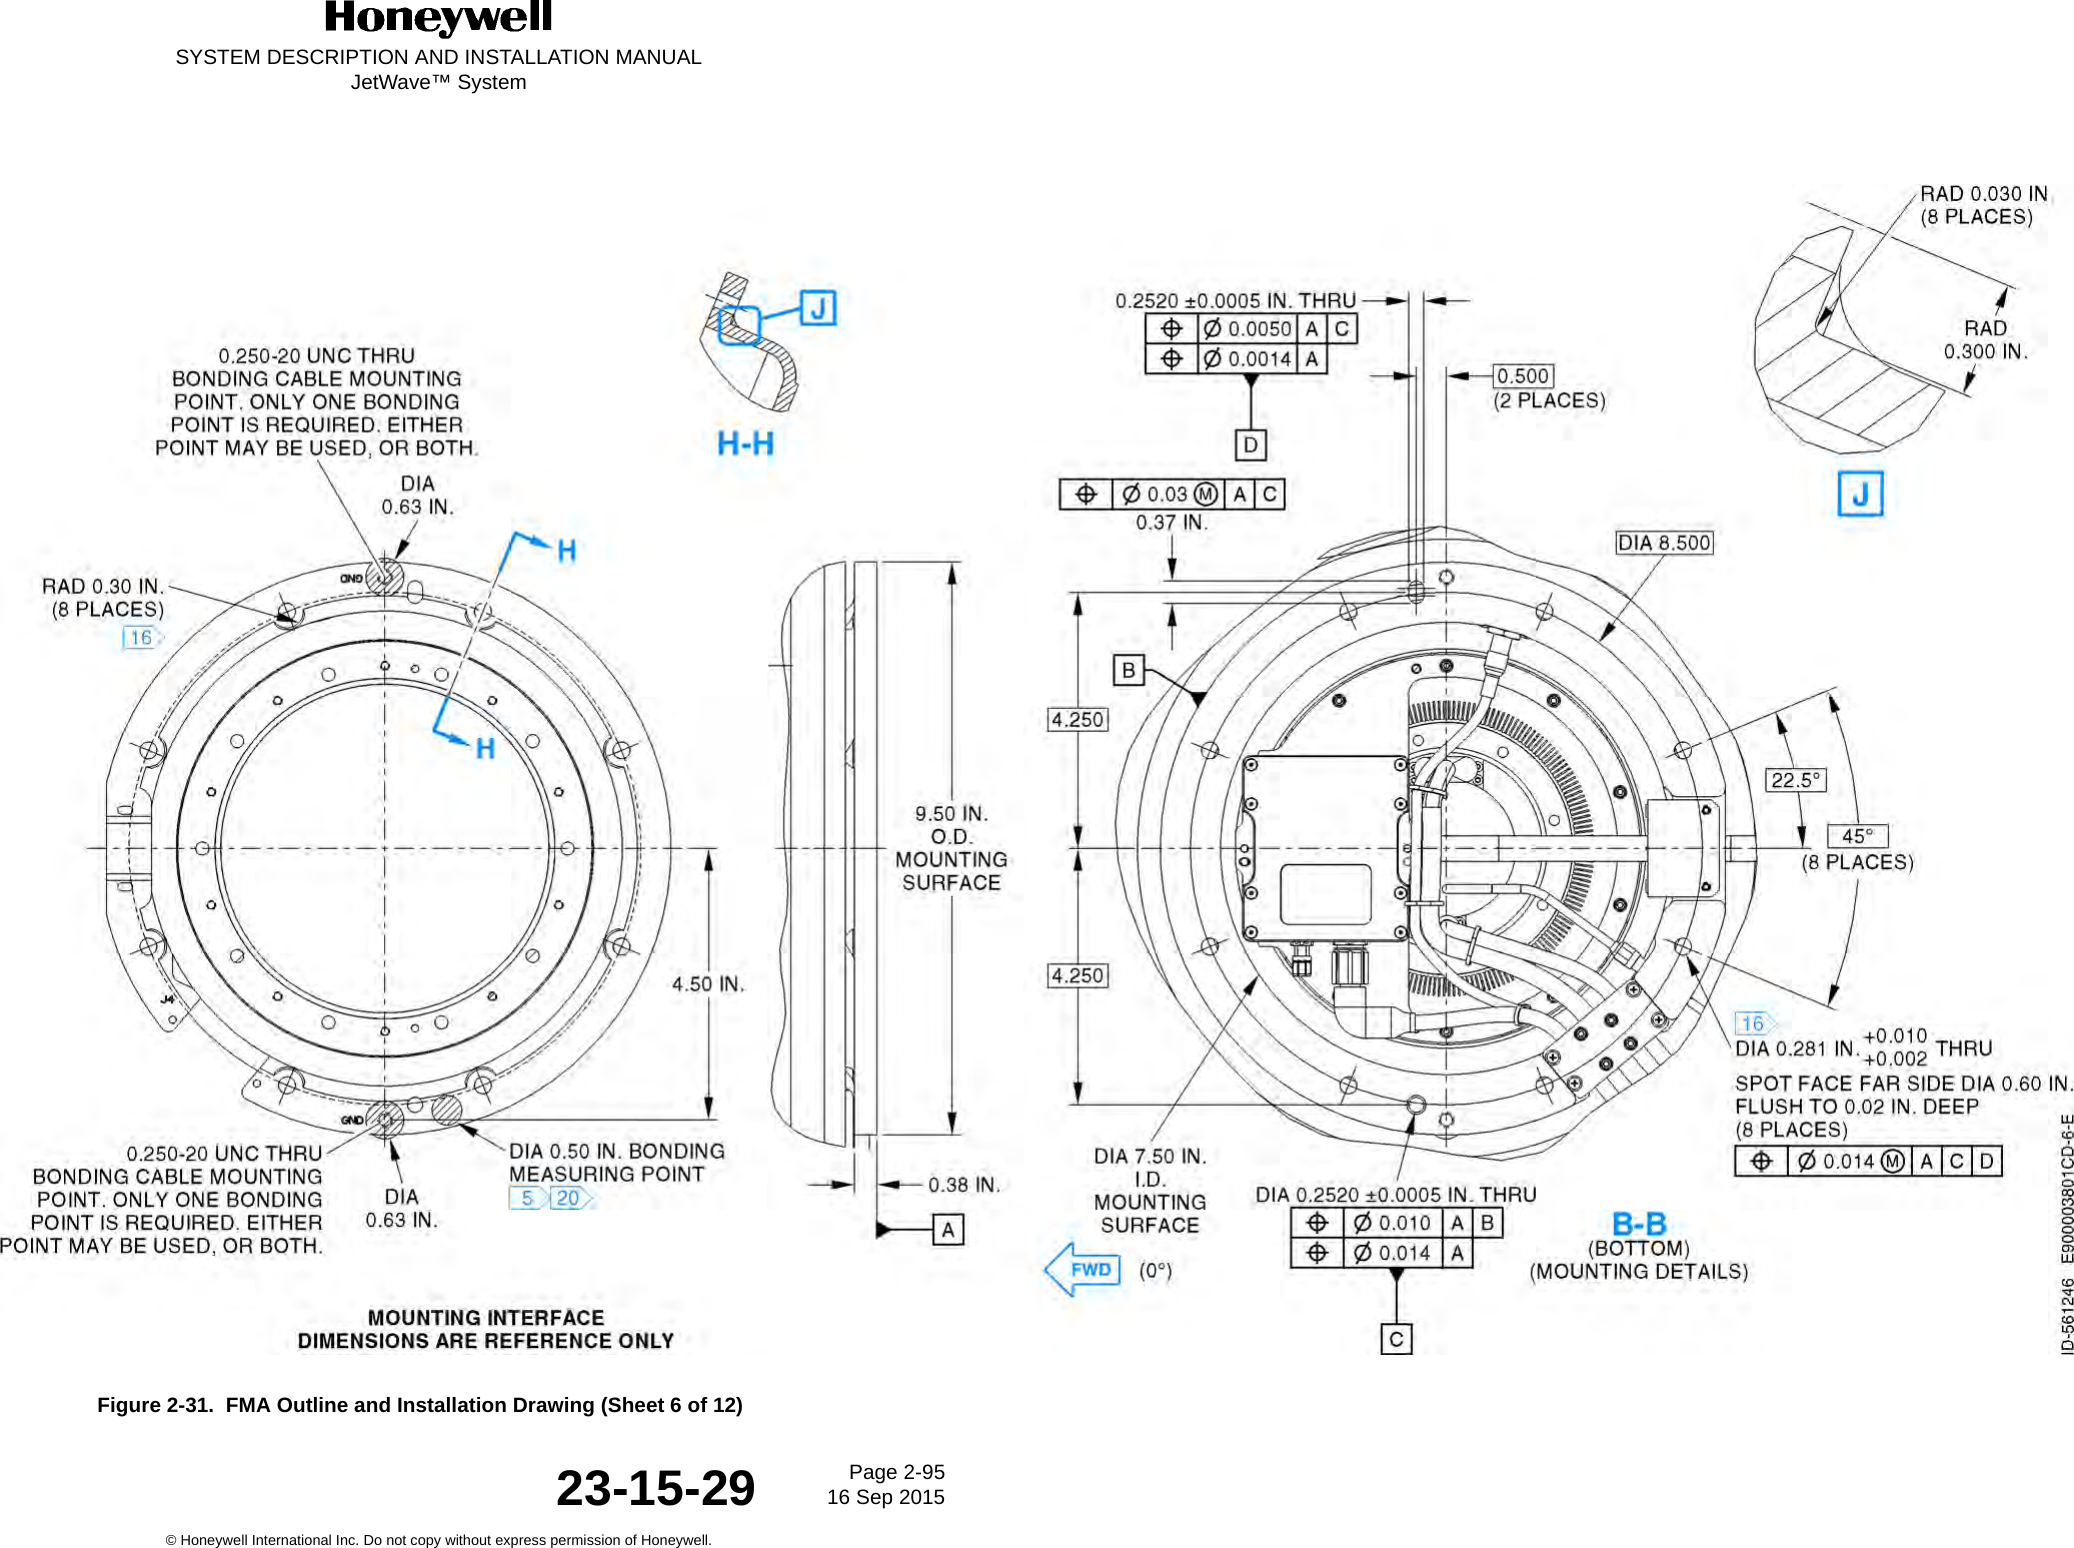 SYSTEM DESCRIPTION AND INSTALLATION MANUALJetWave™ SystemPage 2-95 16 Sep 2015© Honeywell International Inc. Do not copy without express permission of Honeywell.23-15-29Figure 2-31.  FMA Outline and Installation Drawing (Sheet 6 of 12)